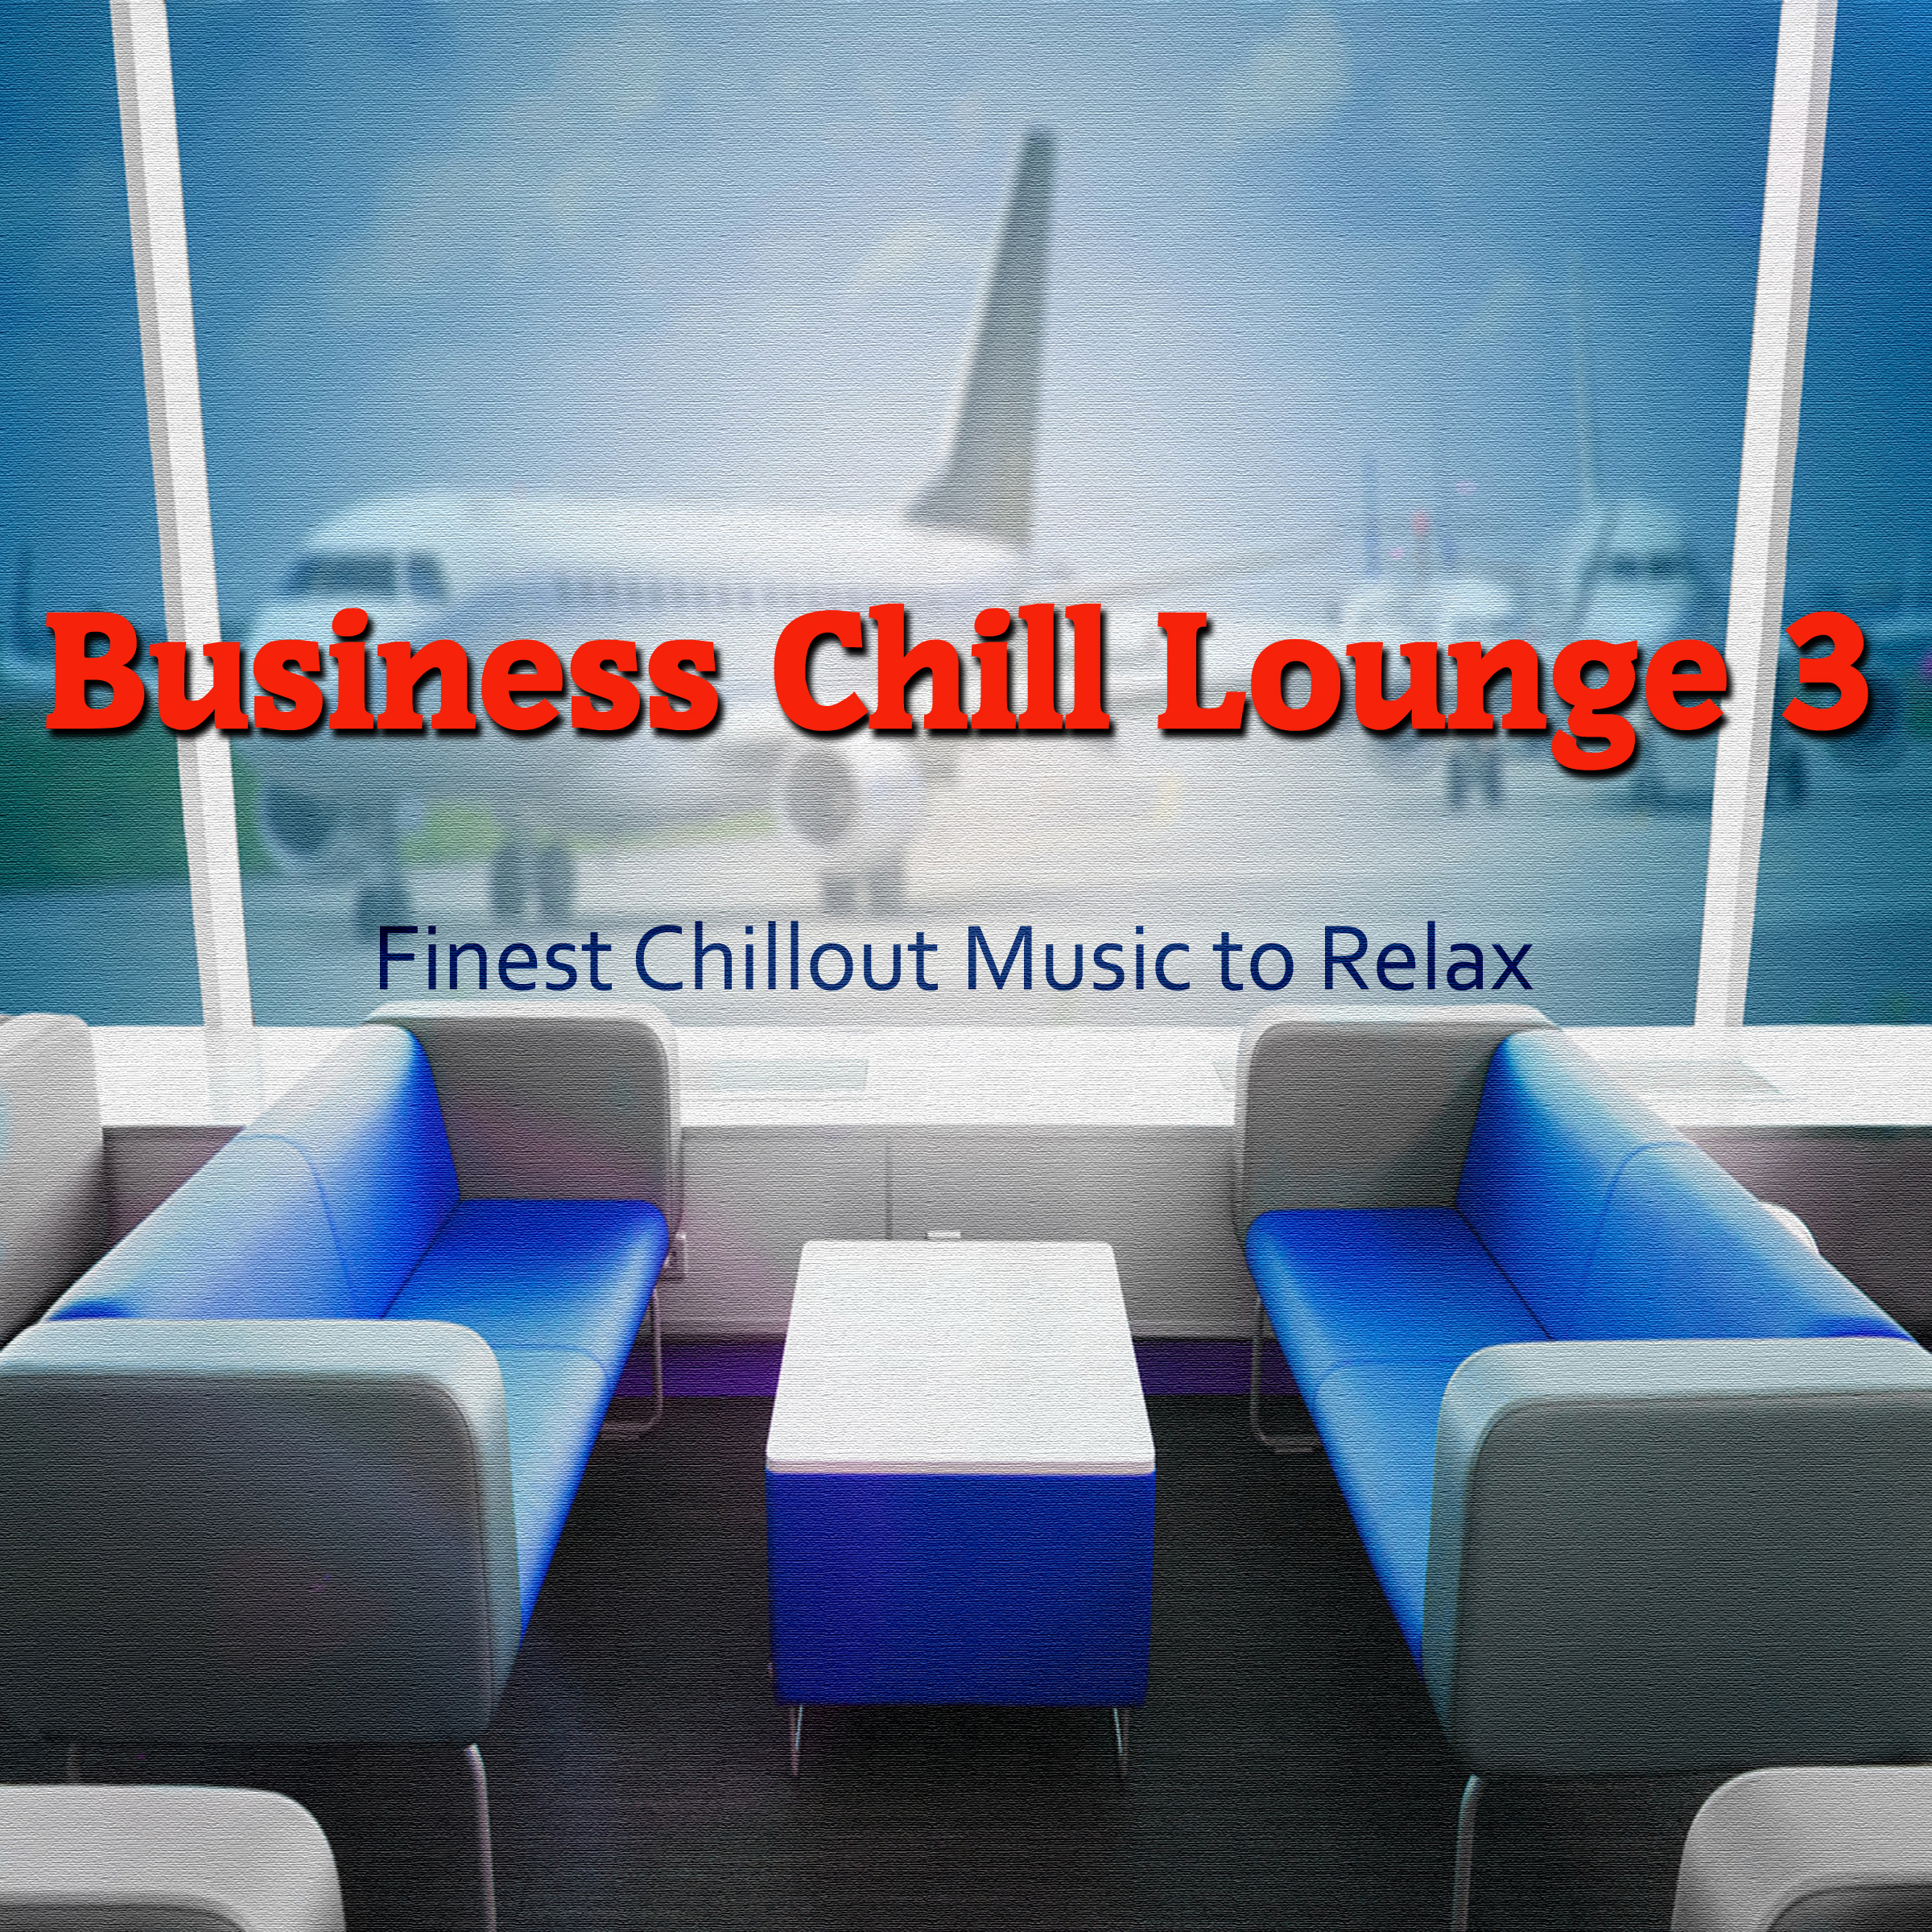 Business Chill Lounge 3 (Finest Chillout Music to Relax)